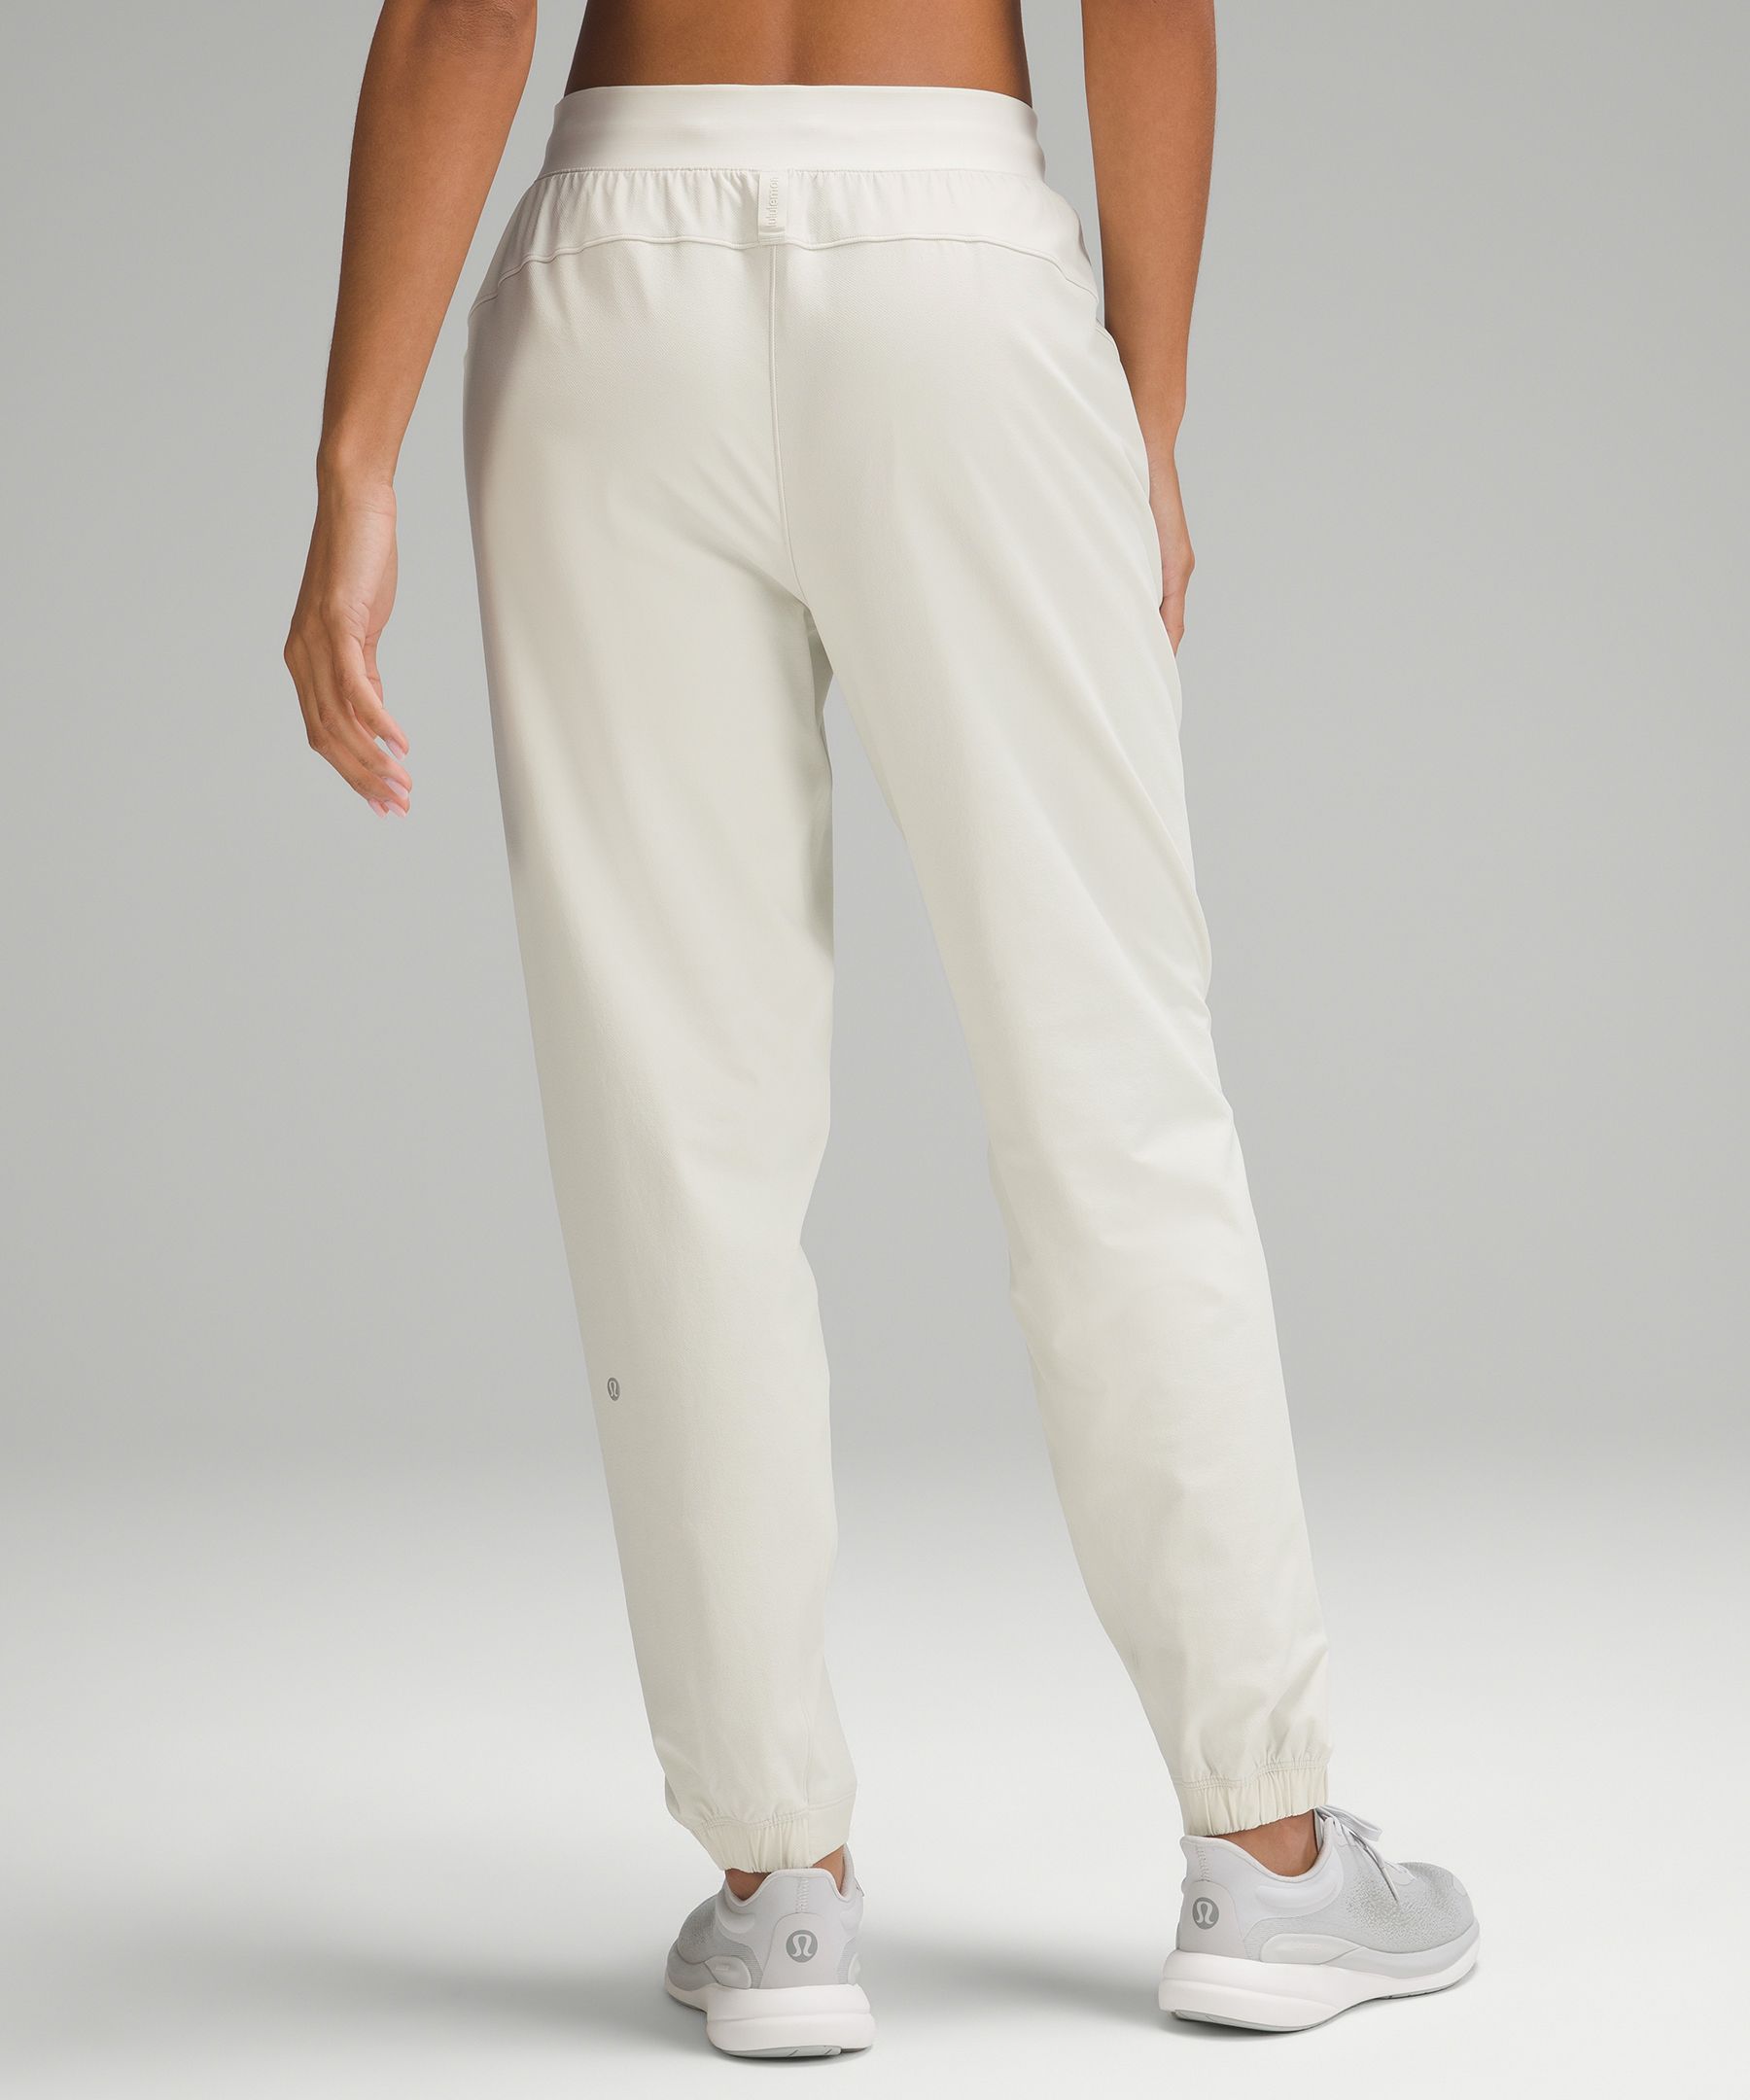 License to Train High-Rise Pant, Women's Joggers, lululemon